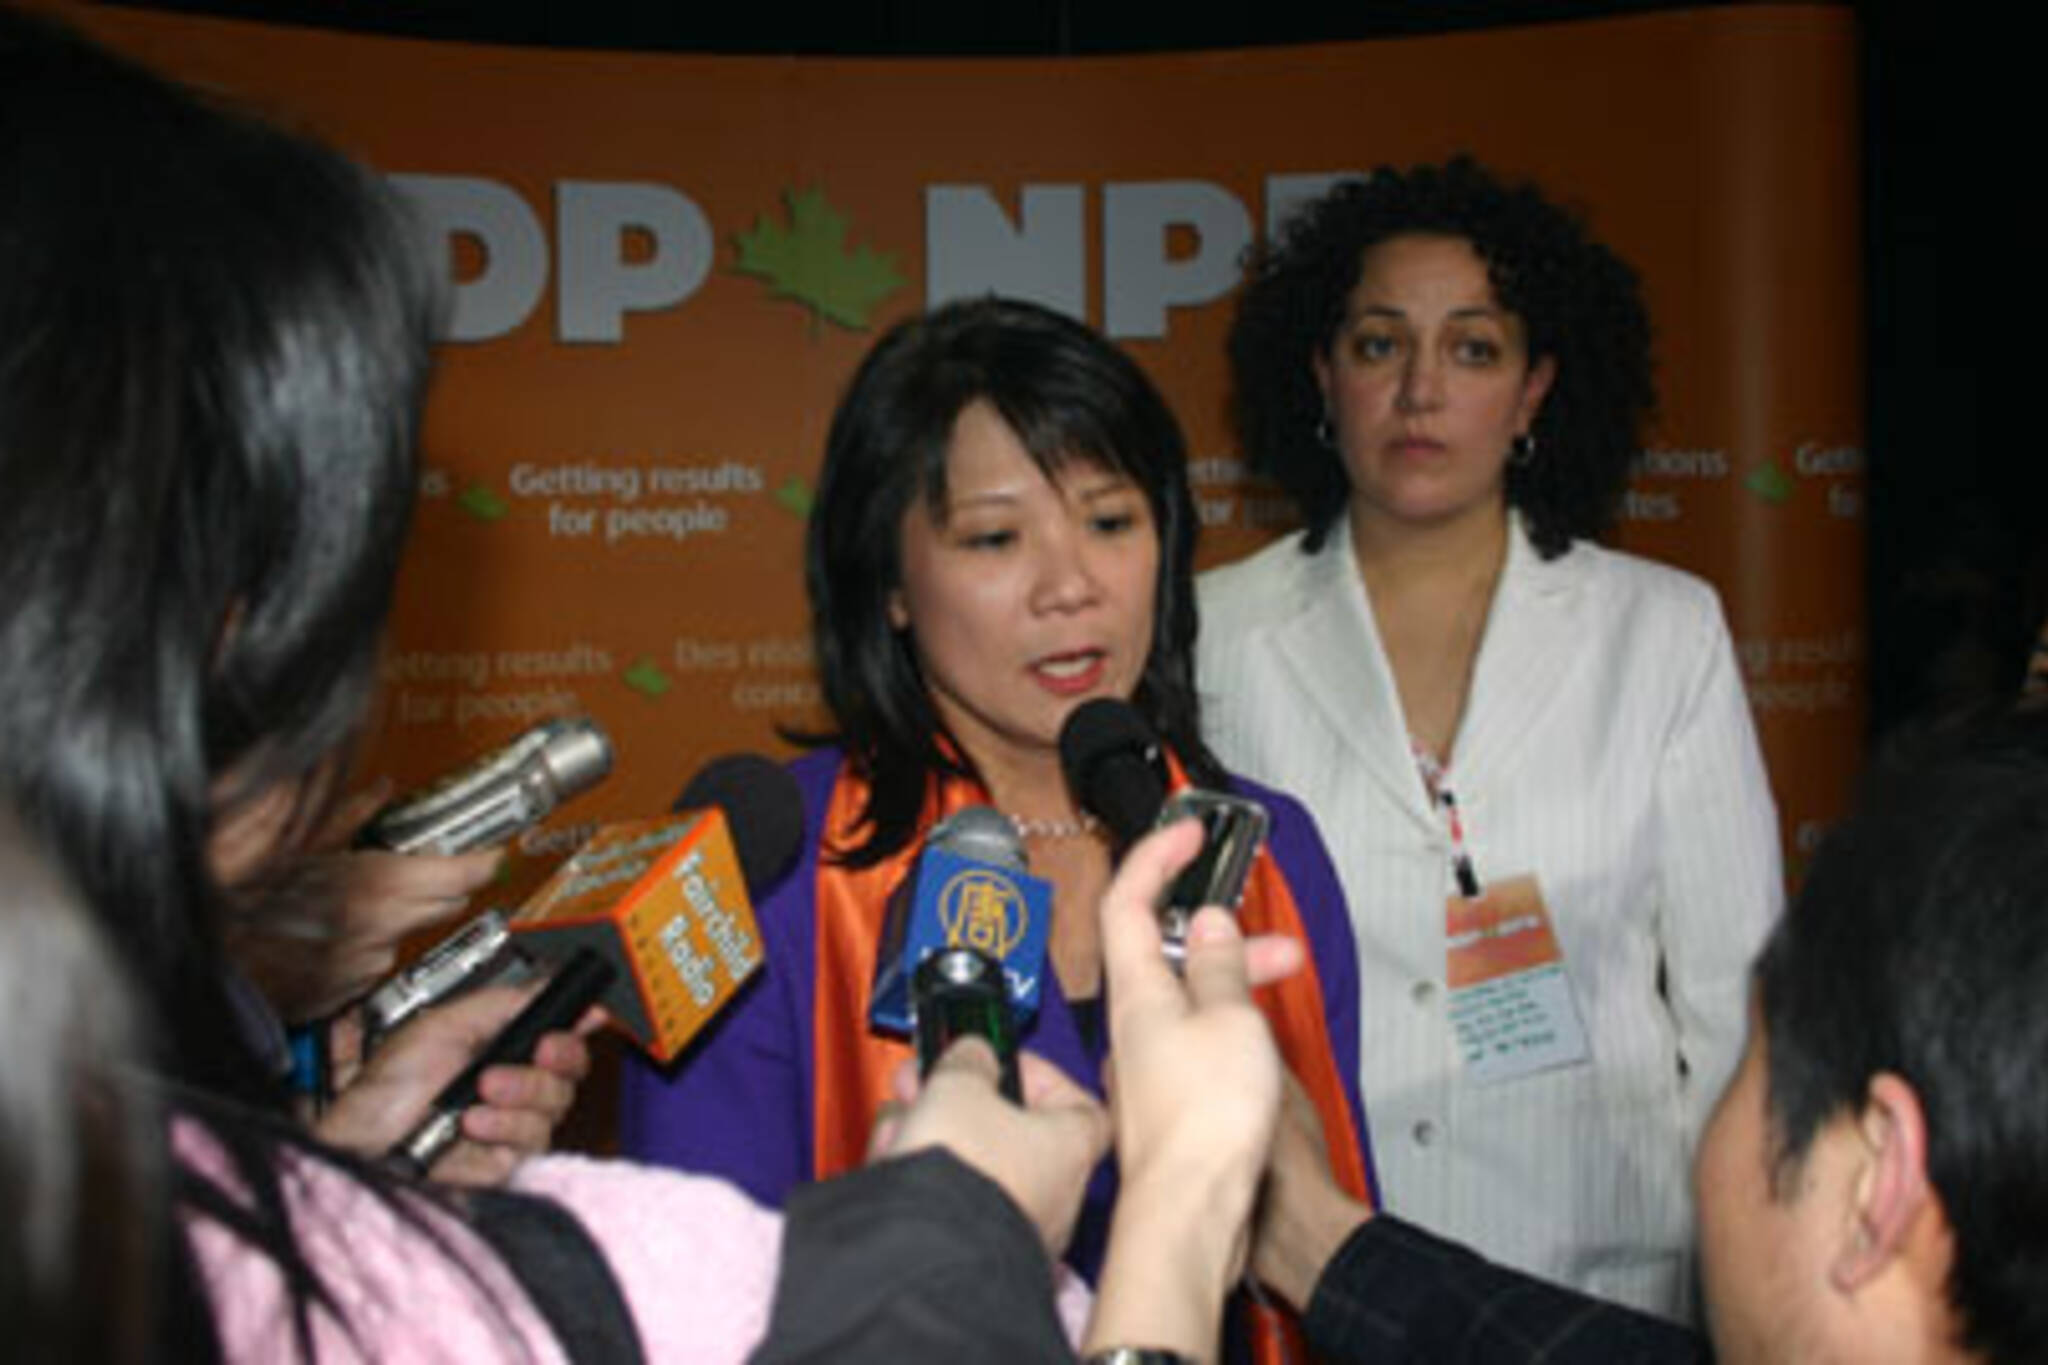 Newly minted MP Olivia Chow jumps into a press scrum after her victory was announced